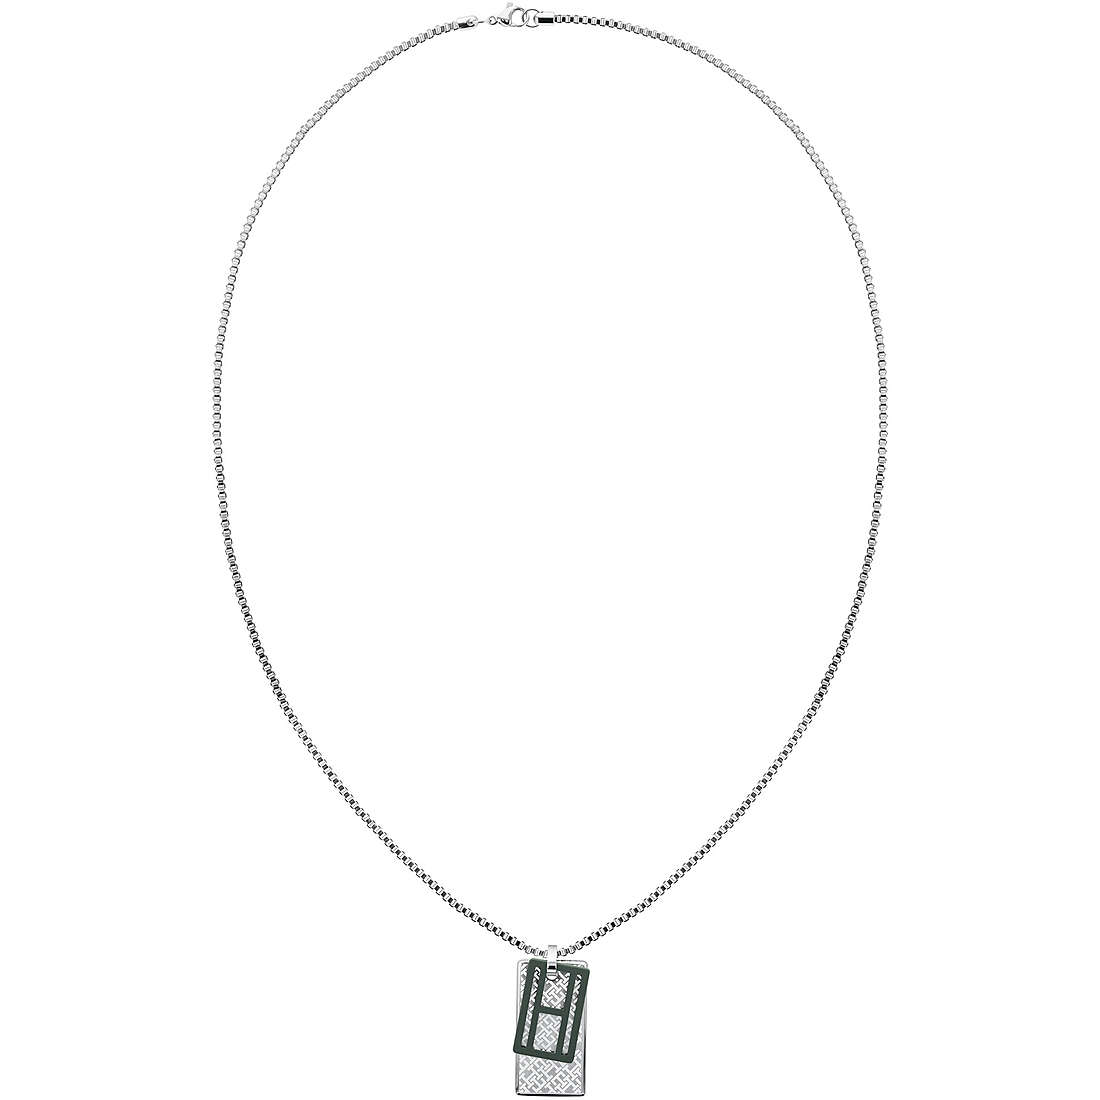 Tommy Hilfiger men's stainless steel chain necklace | littlewoods.com